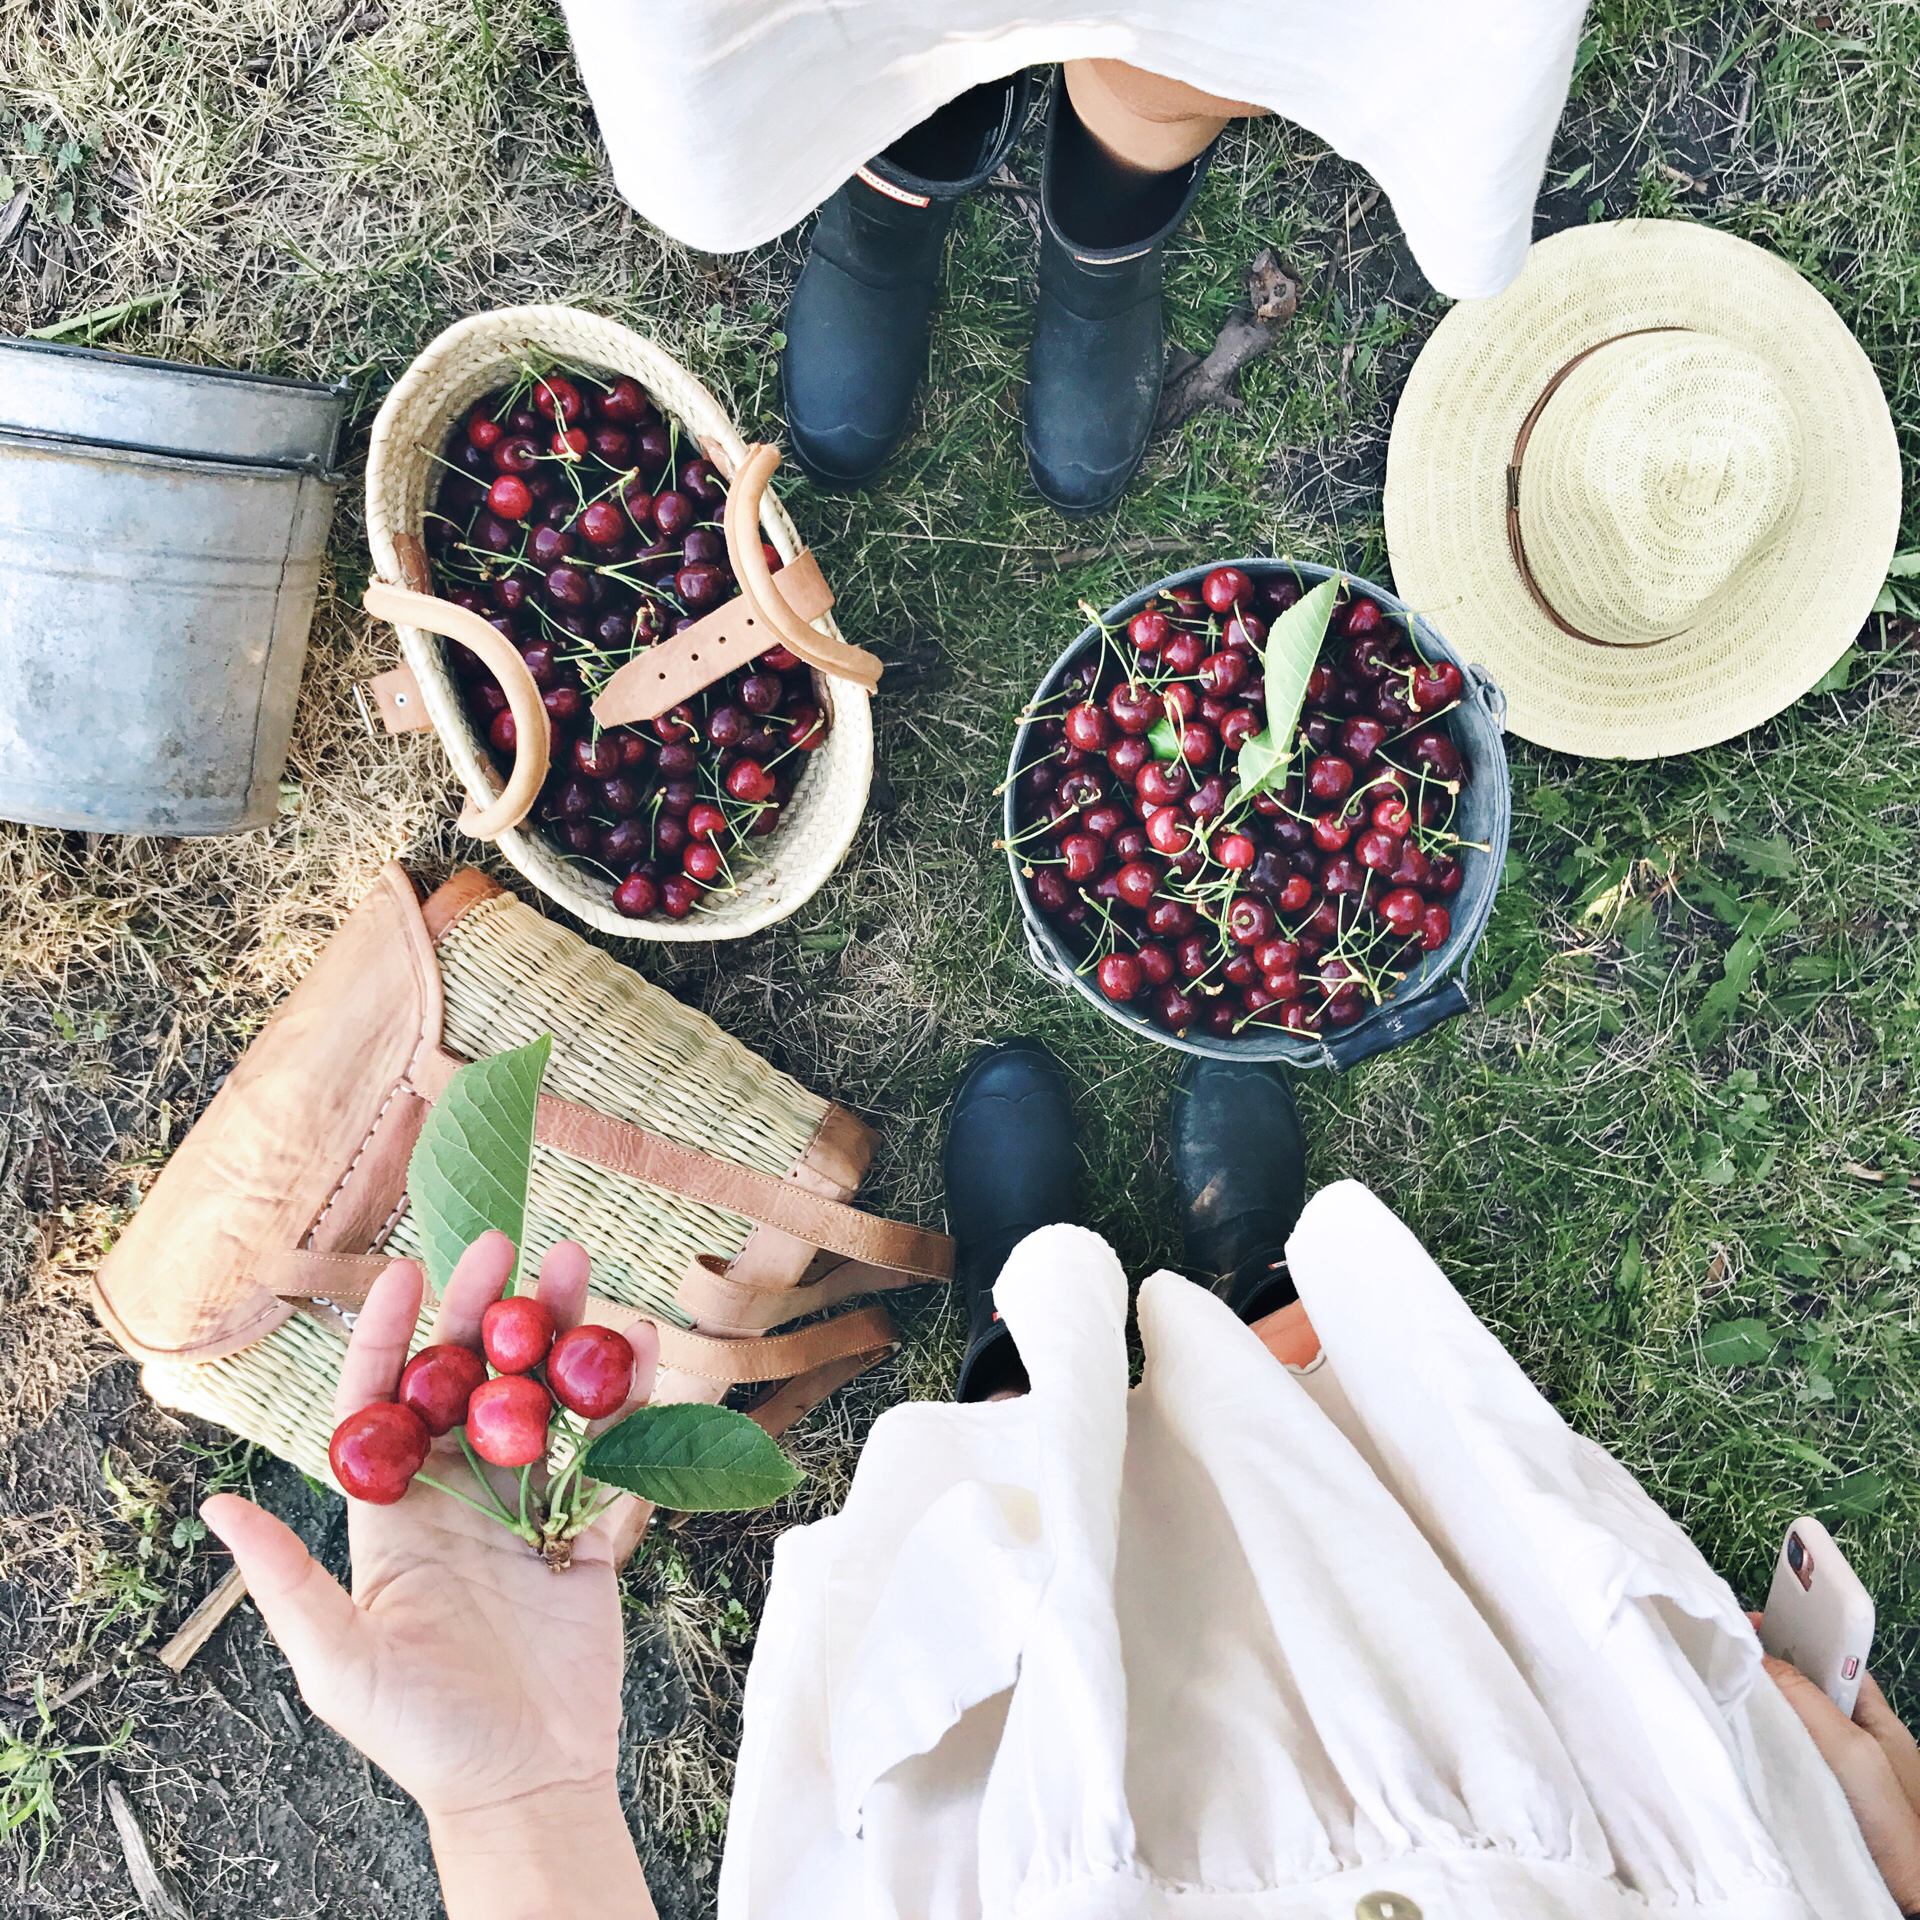 Cherry Picking with pretty baskets, white dresses and straw hats.